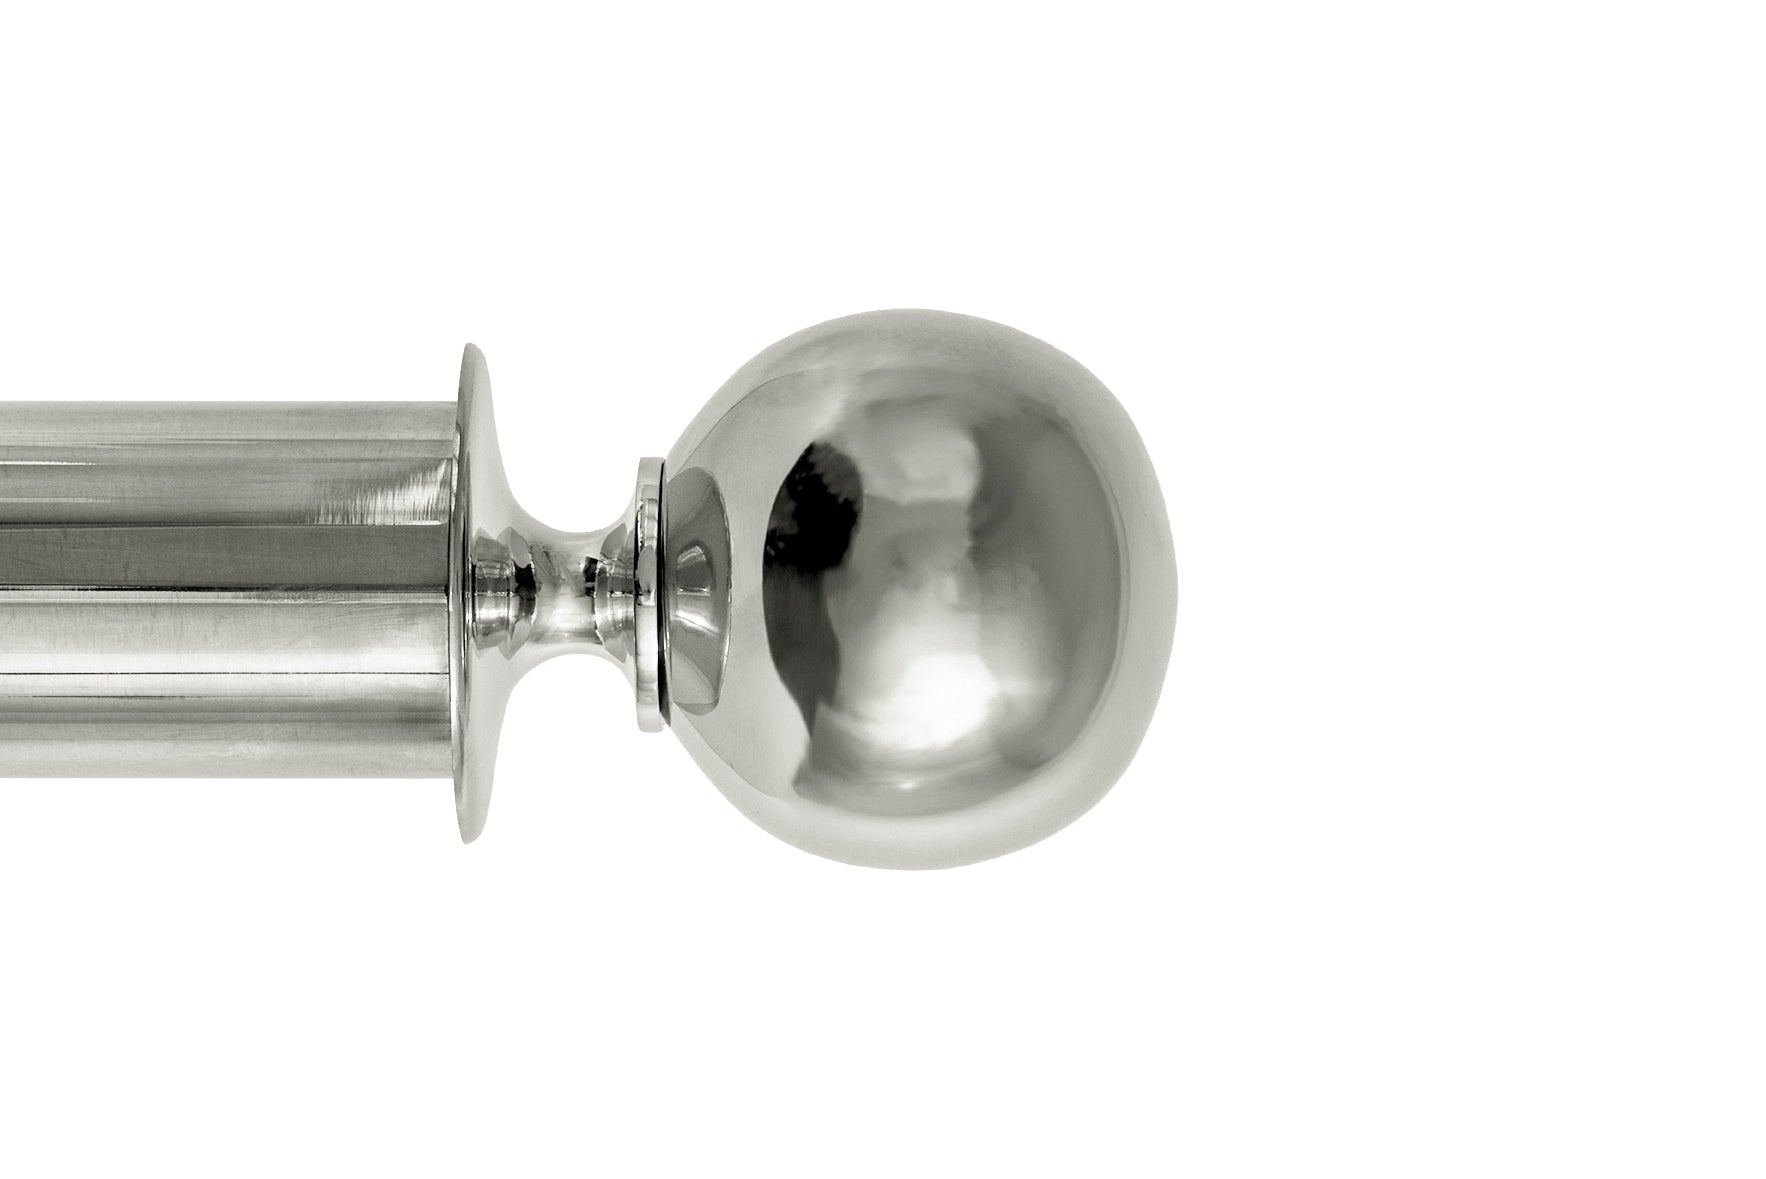 Tillys Classic Plain Ball Finial Curtain Pole Set in Polished Nickel